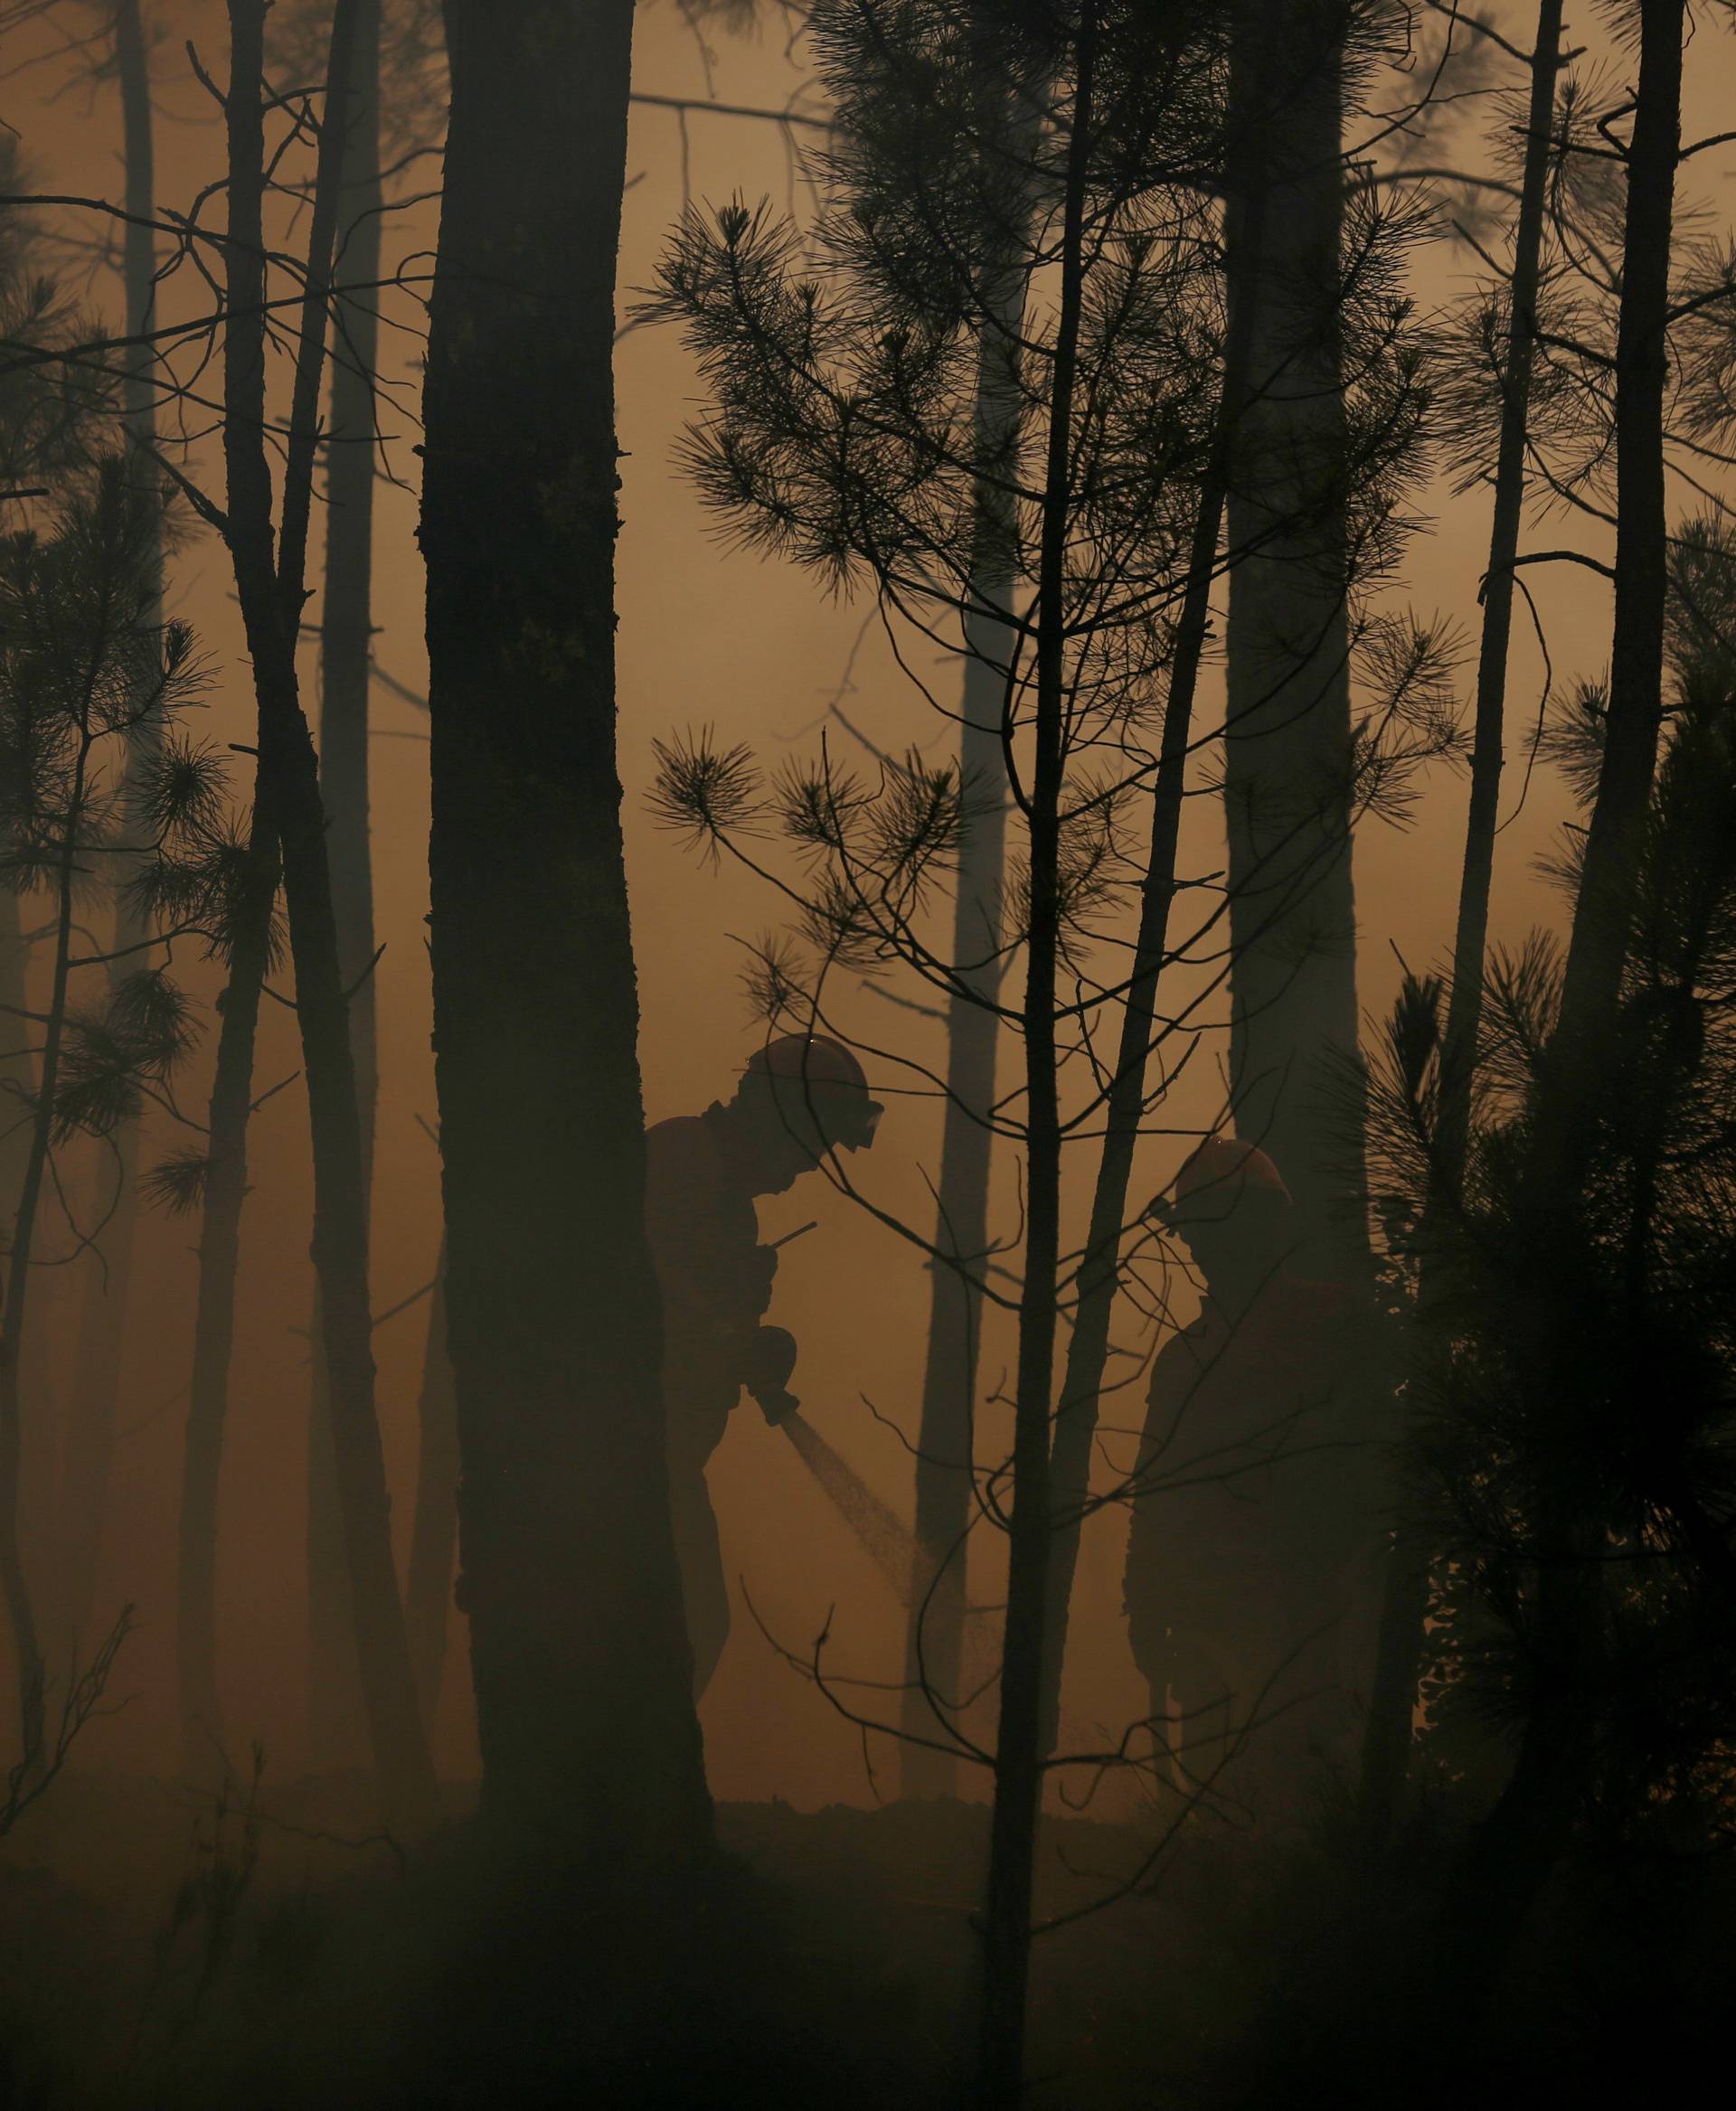 Firefighters work to put out fire during a forest fire in Capelo